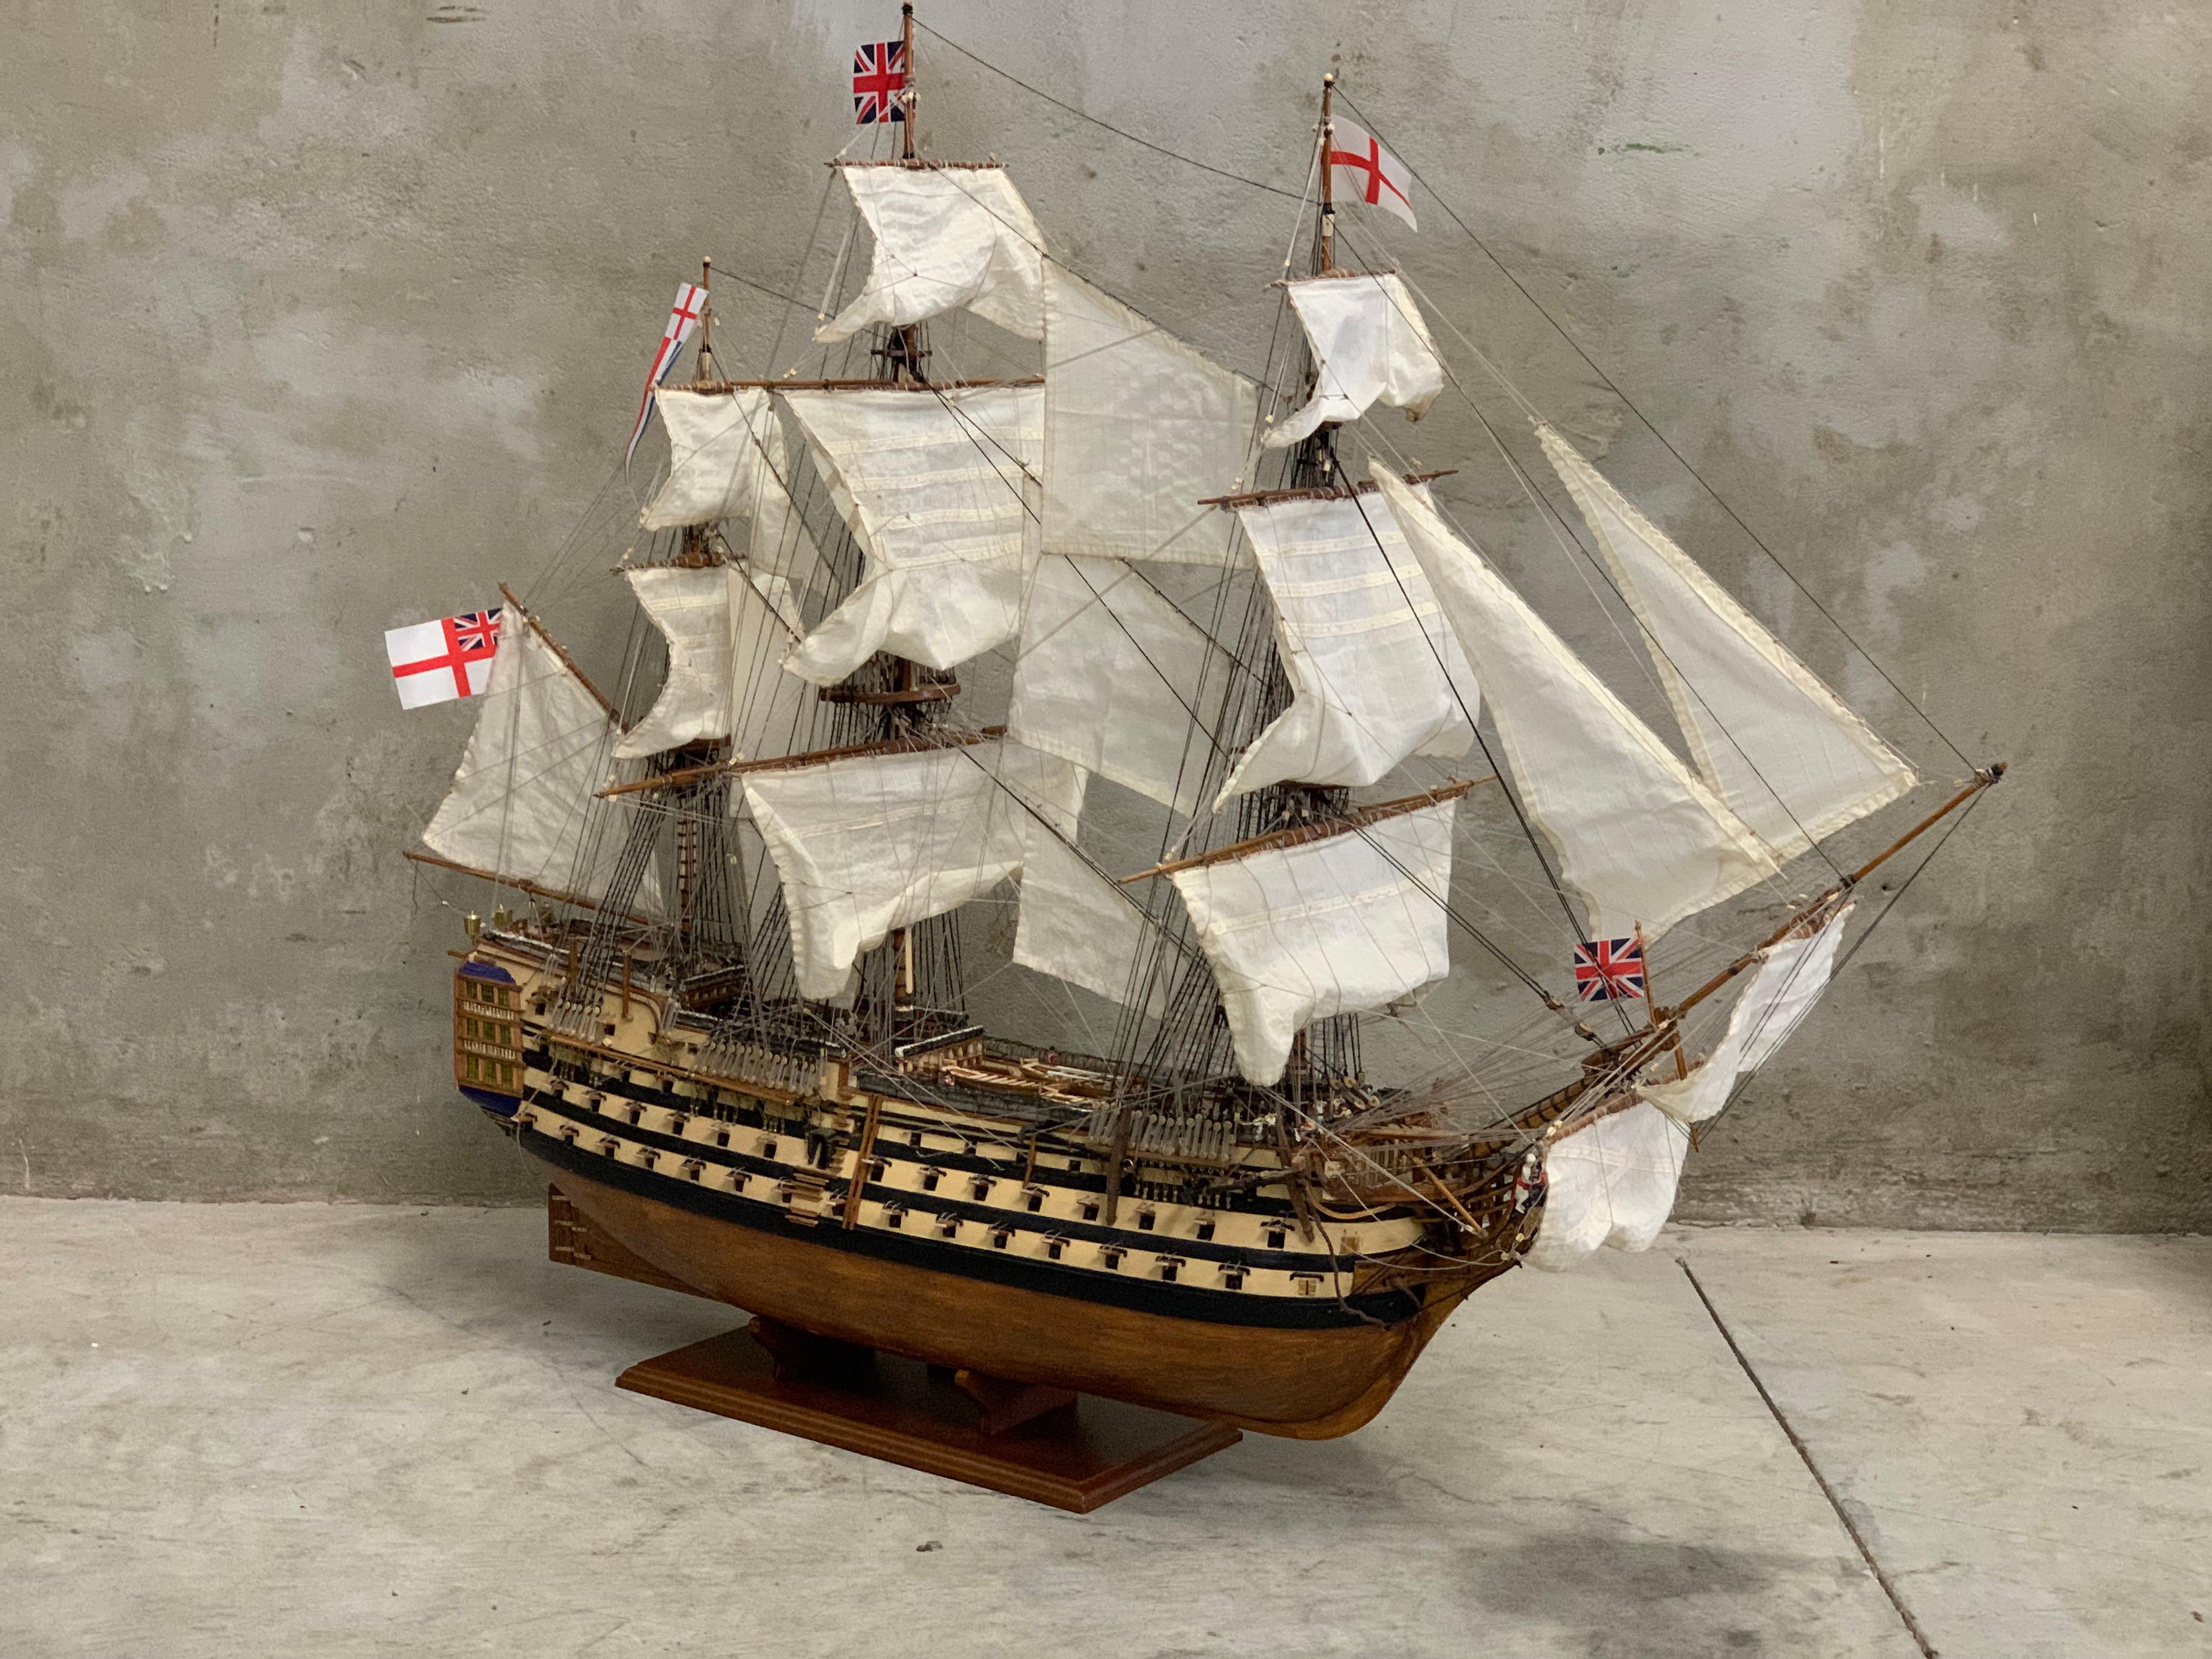 Stunning handmade modelship of the famous H.M.S. Victory. Made in over 1500 hours from a 5 star model kit by a shipbuilding enthusiast and was finished in 2008. The model is completely made of wood with, metal and brass parts, bronze canons and tin